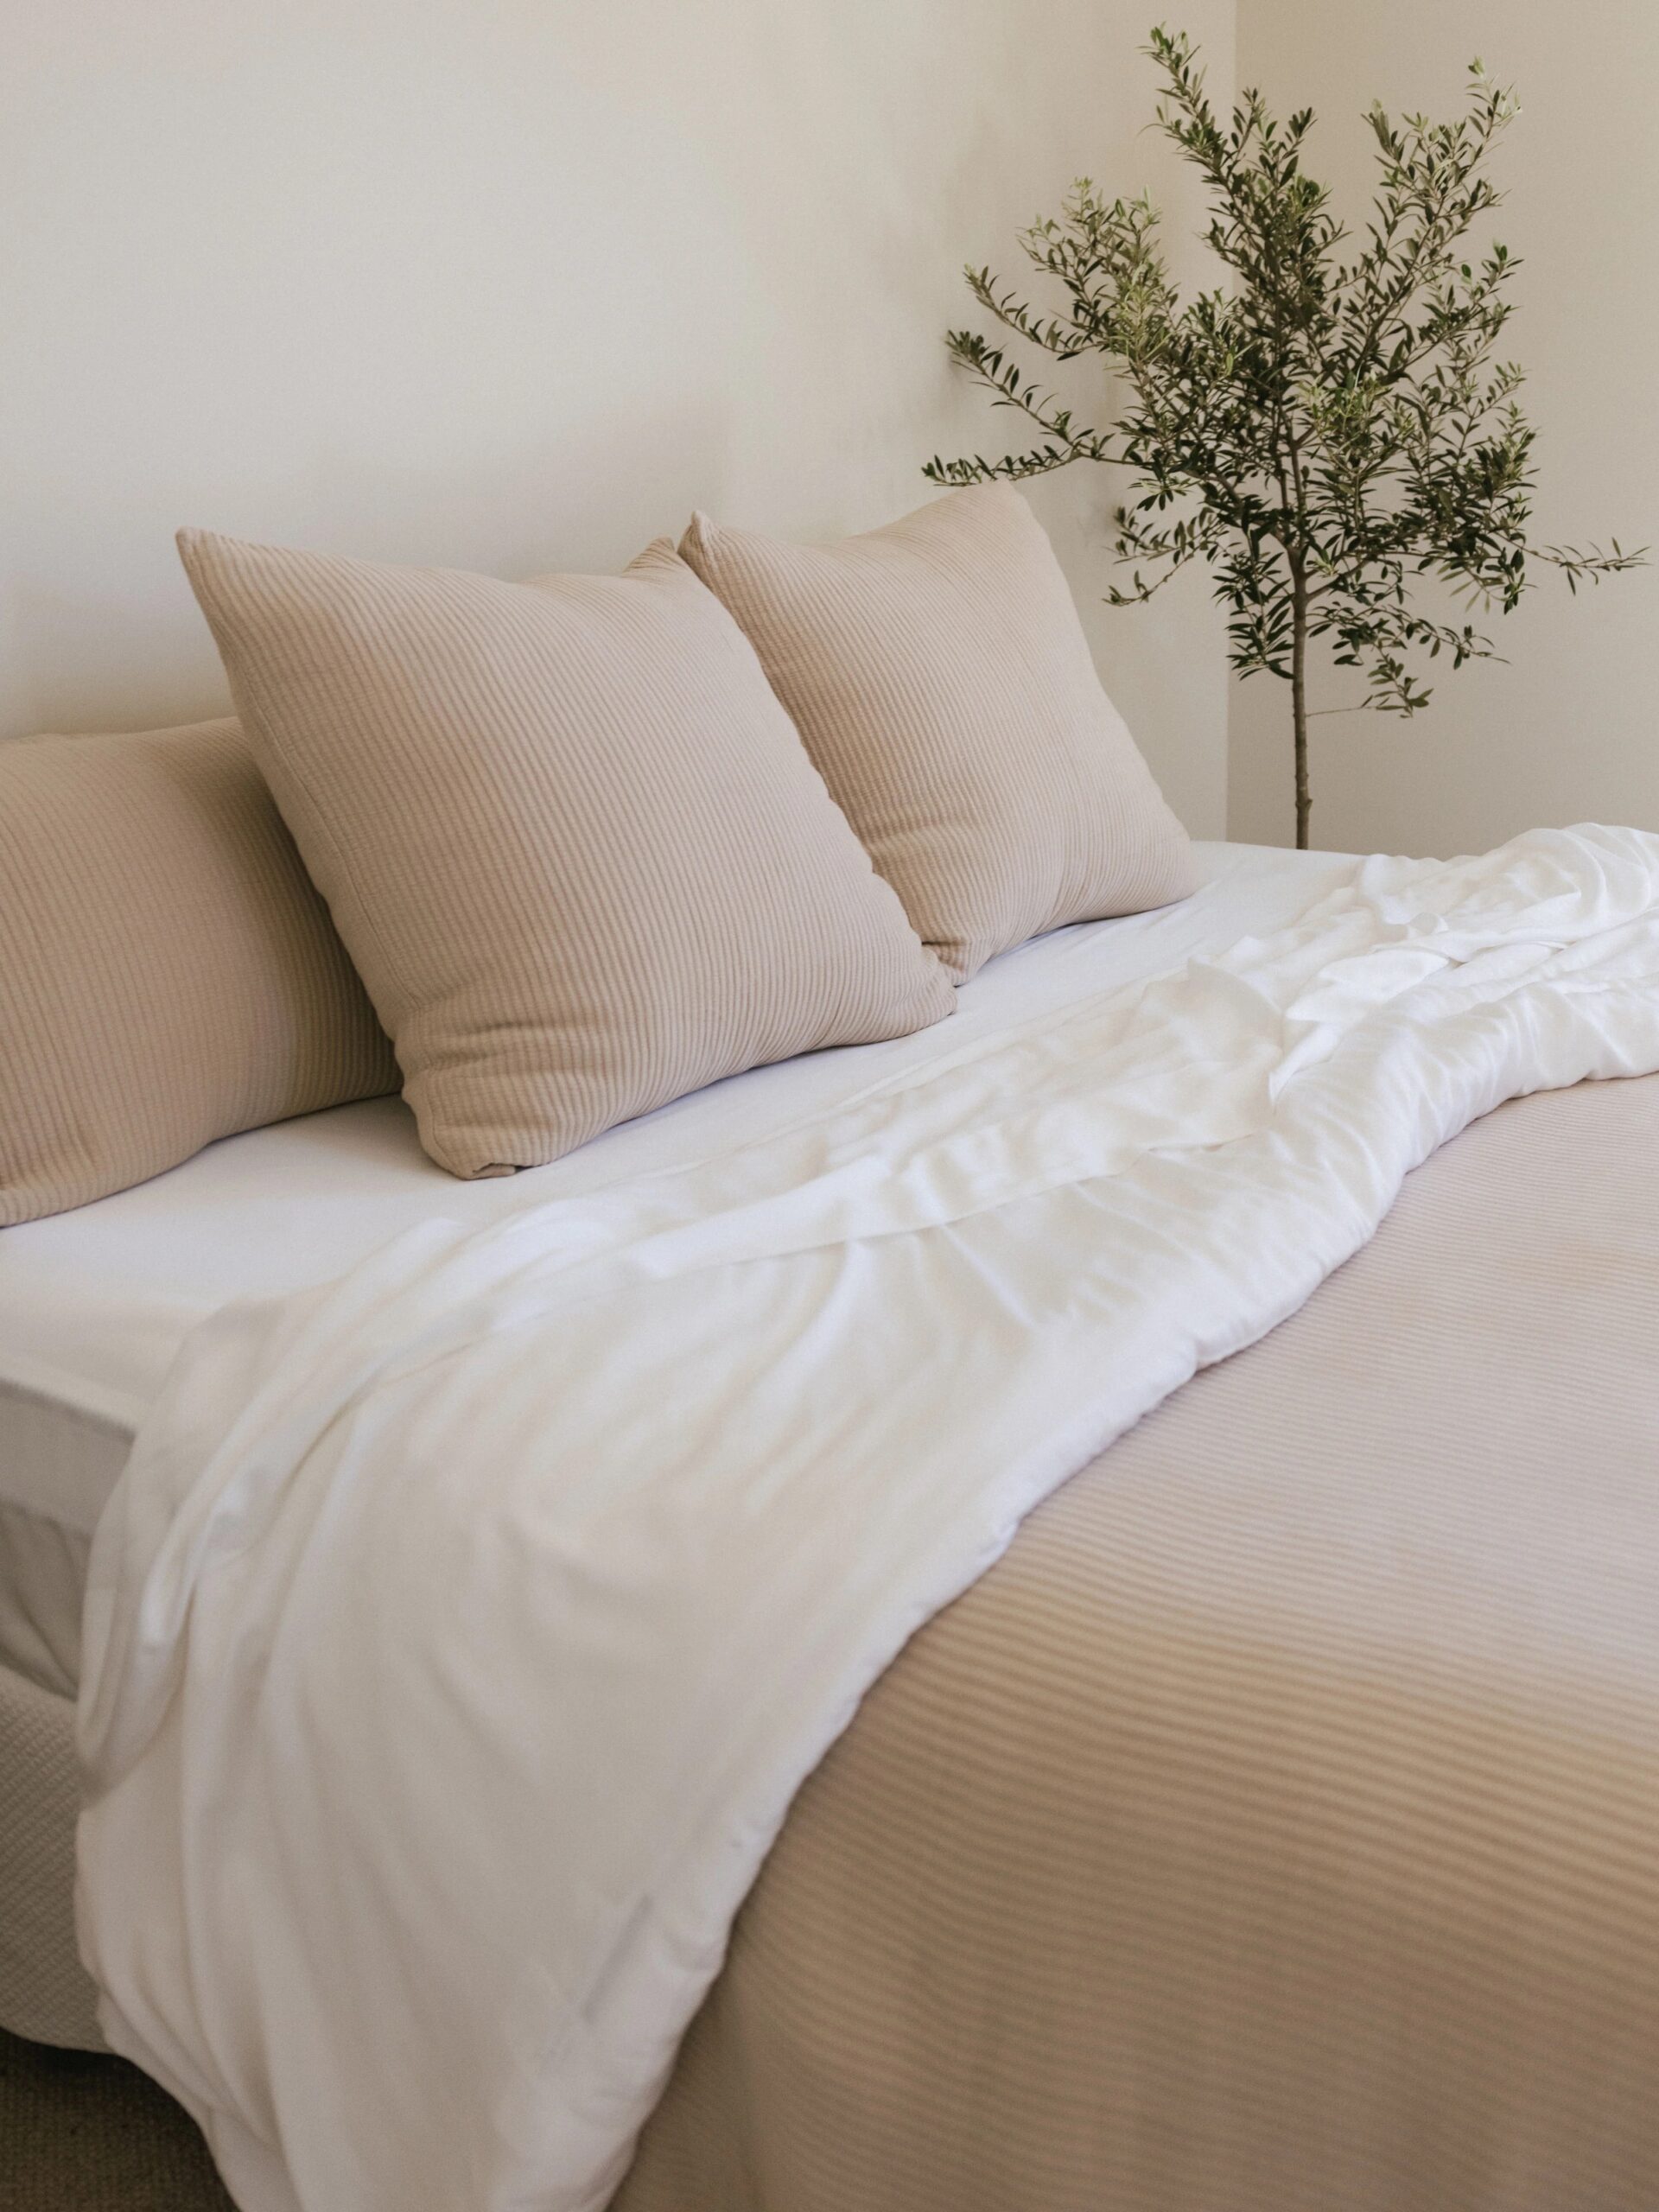 A neatly made bed with beige pillows and a white blanket. A small potted tree stands next to the bed against a white wall.